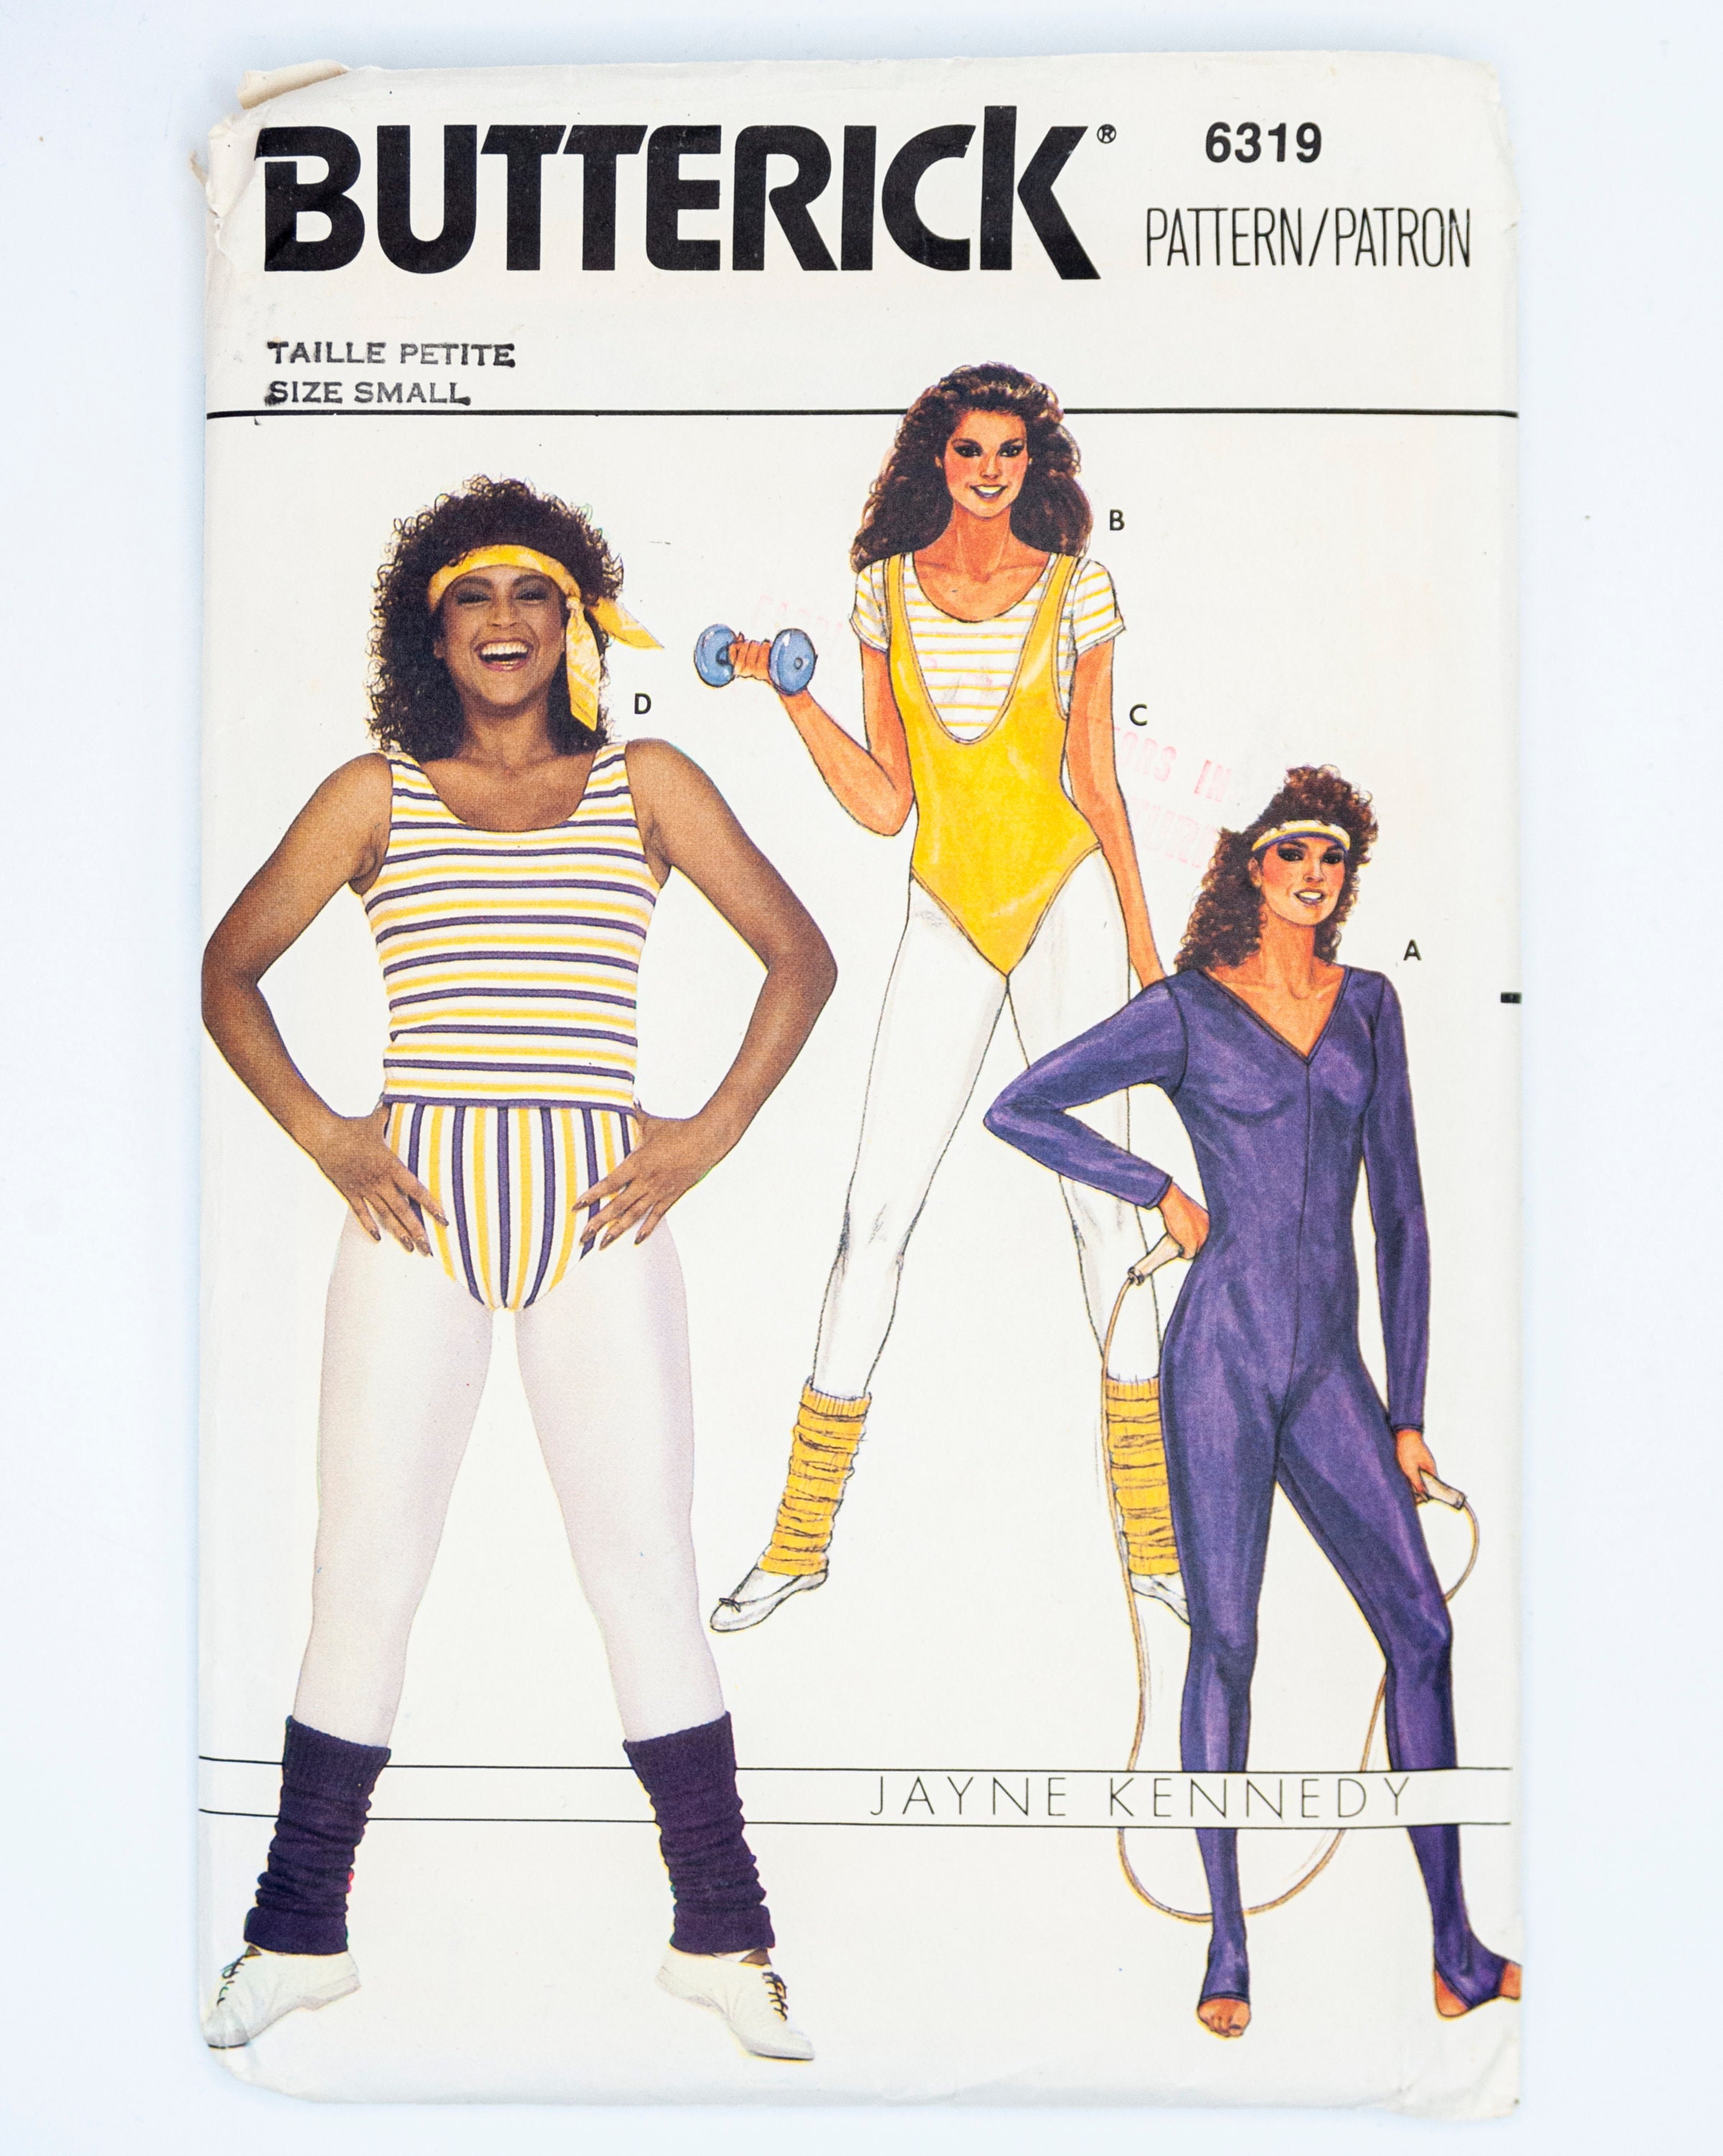 Jazzercise, aerobics, and workout clothing of the early 1980s : r/nostalgia